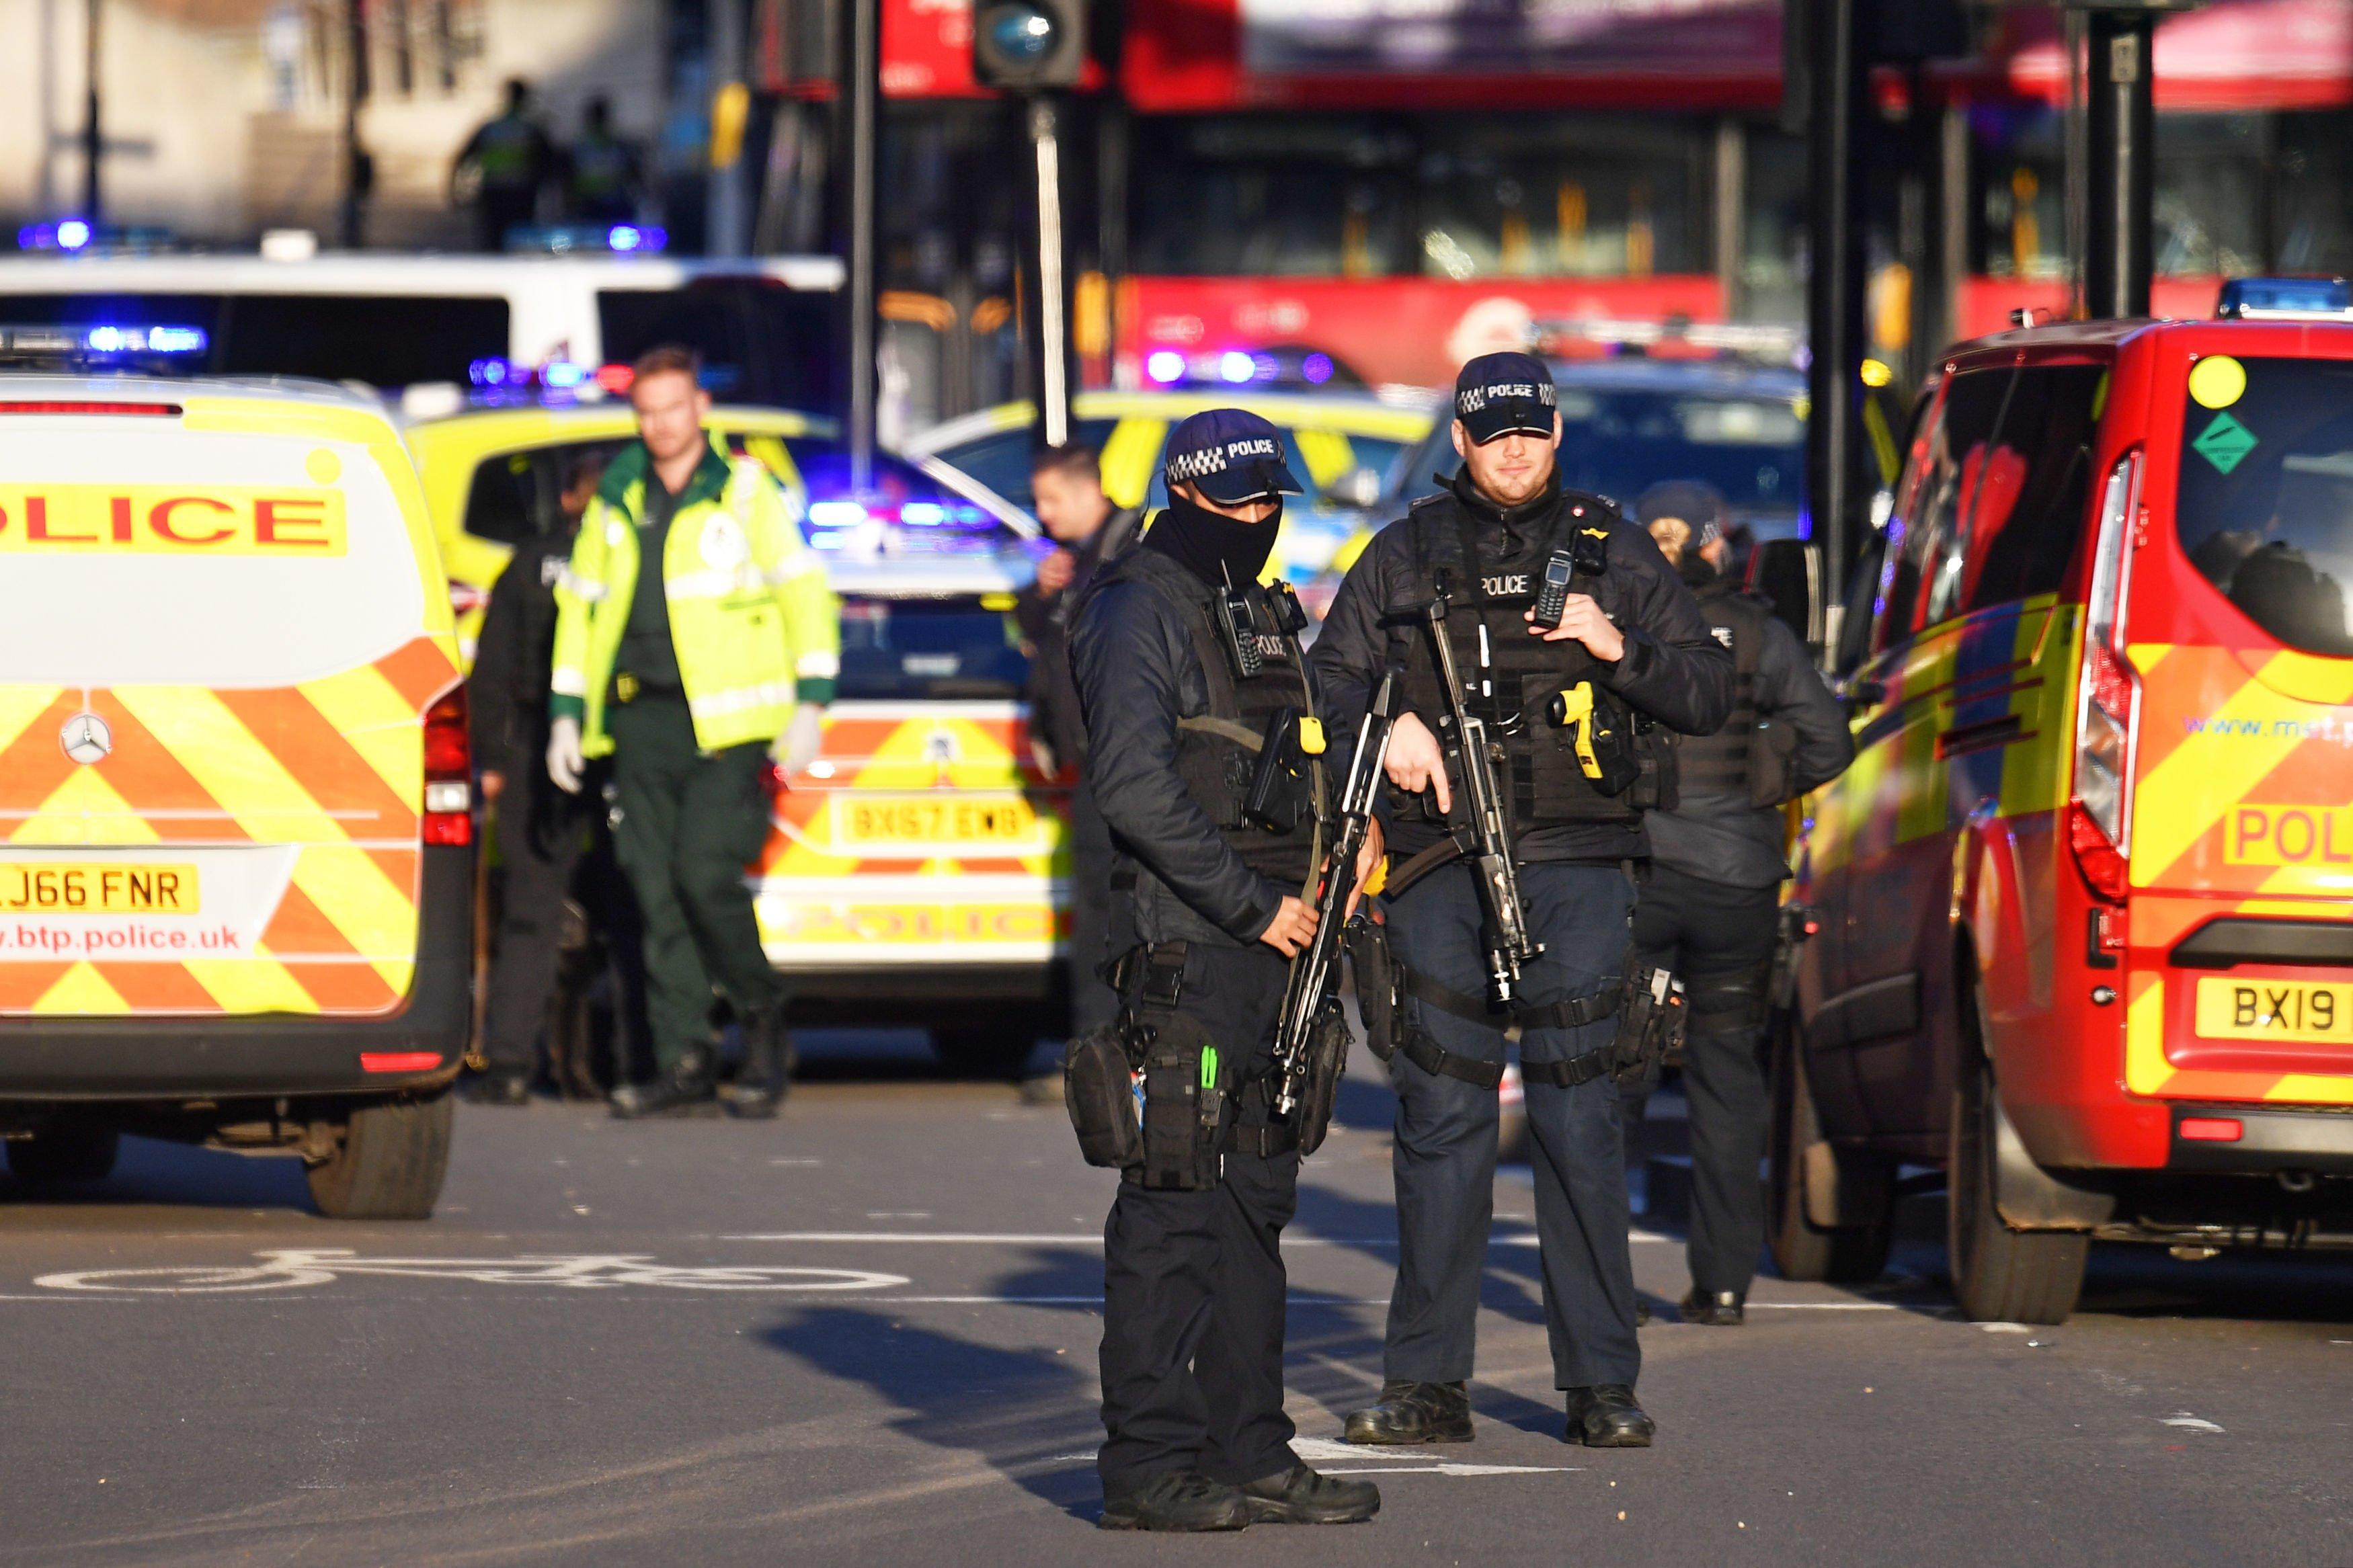 Armed police at the scene of an incident on London Bridge in central London